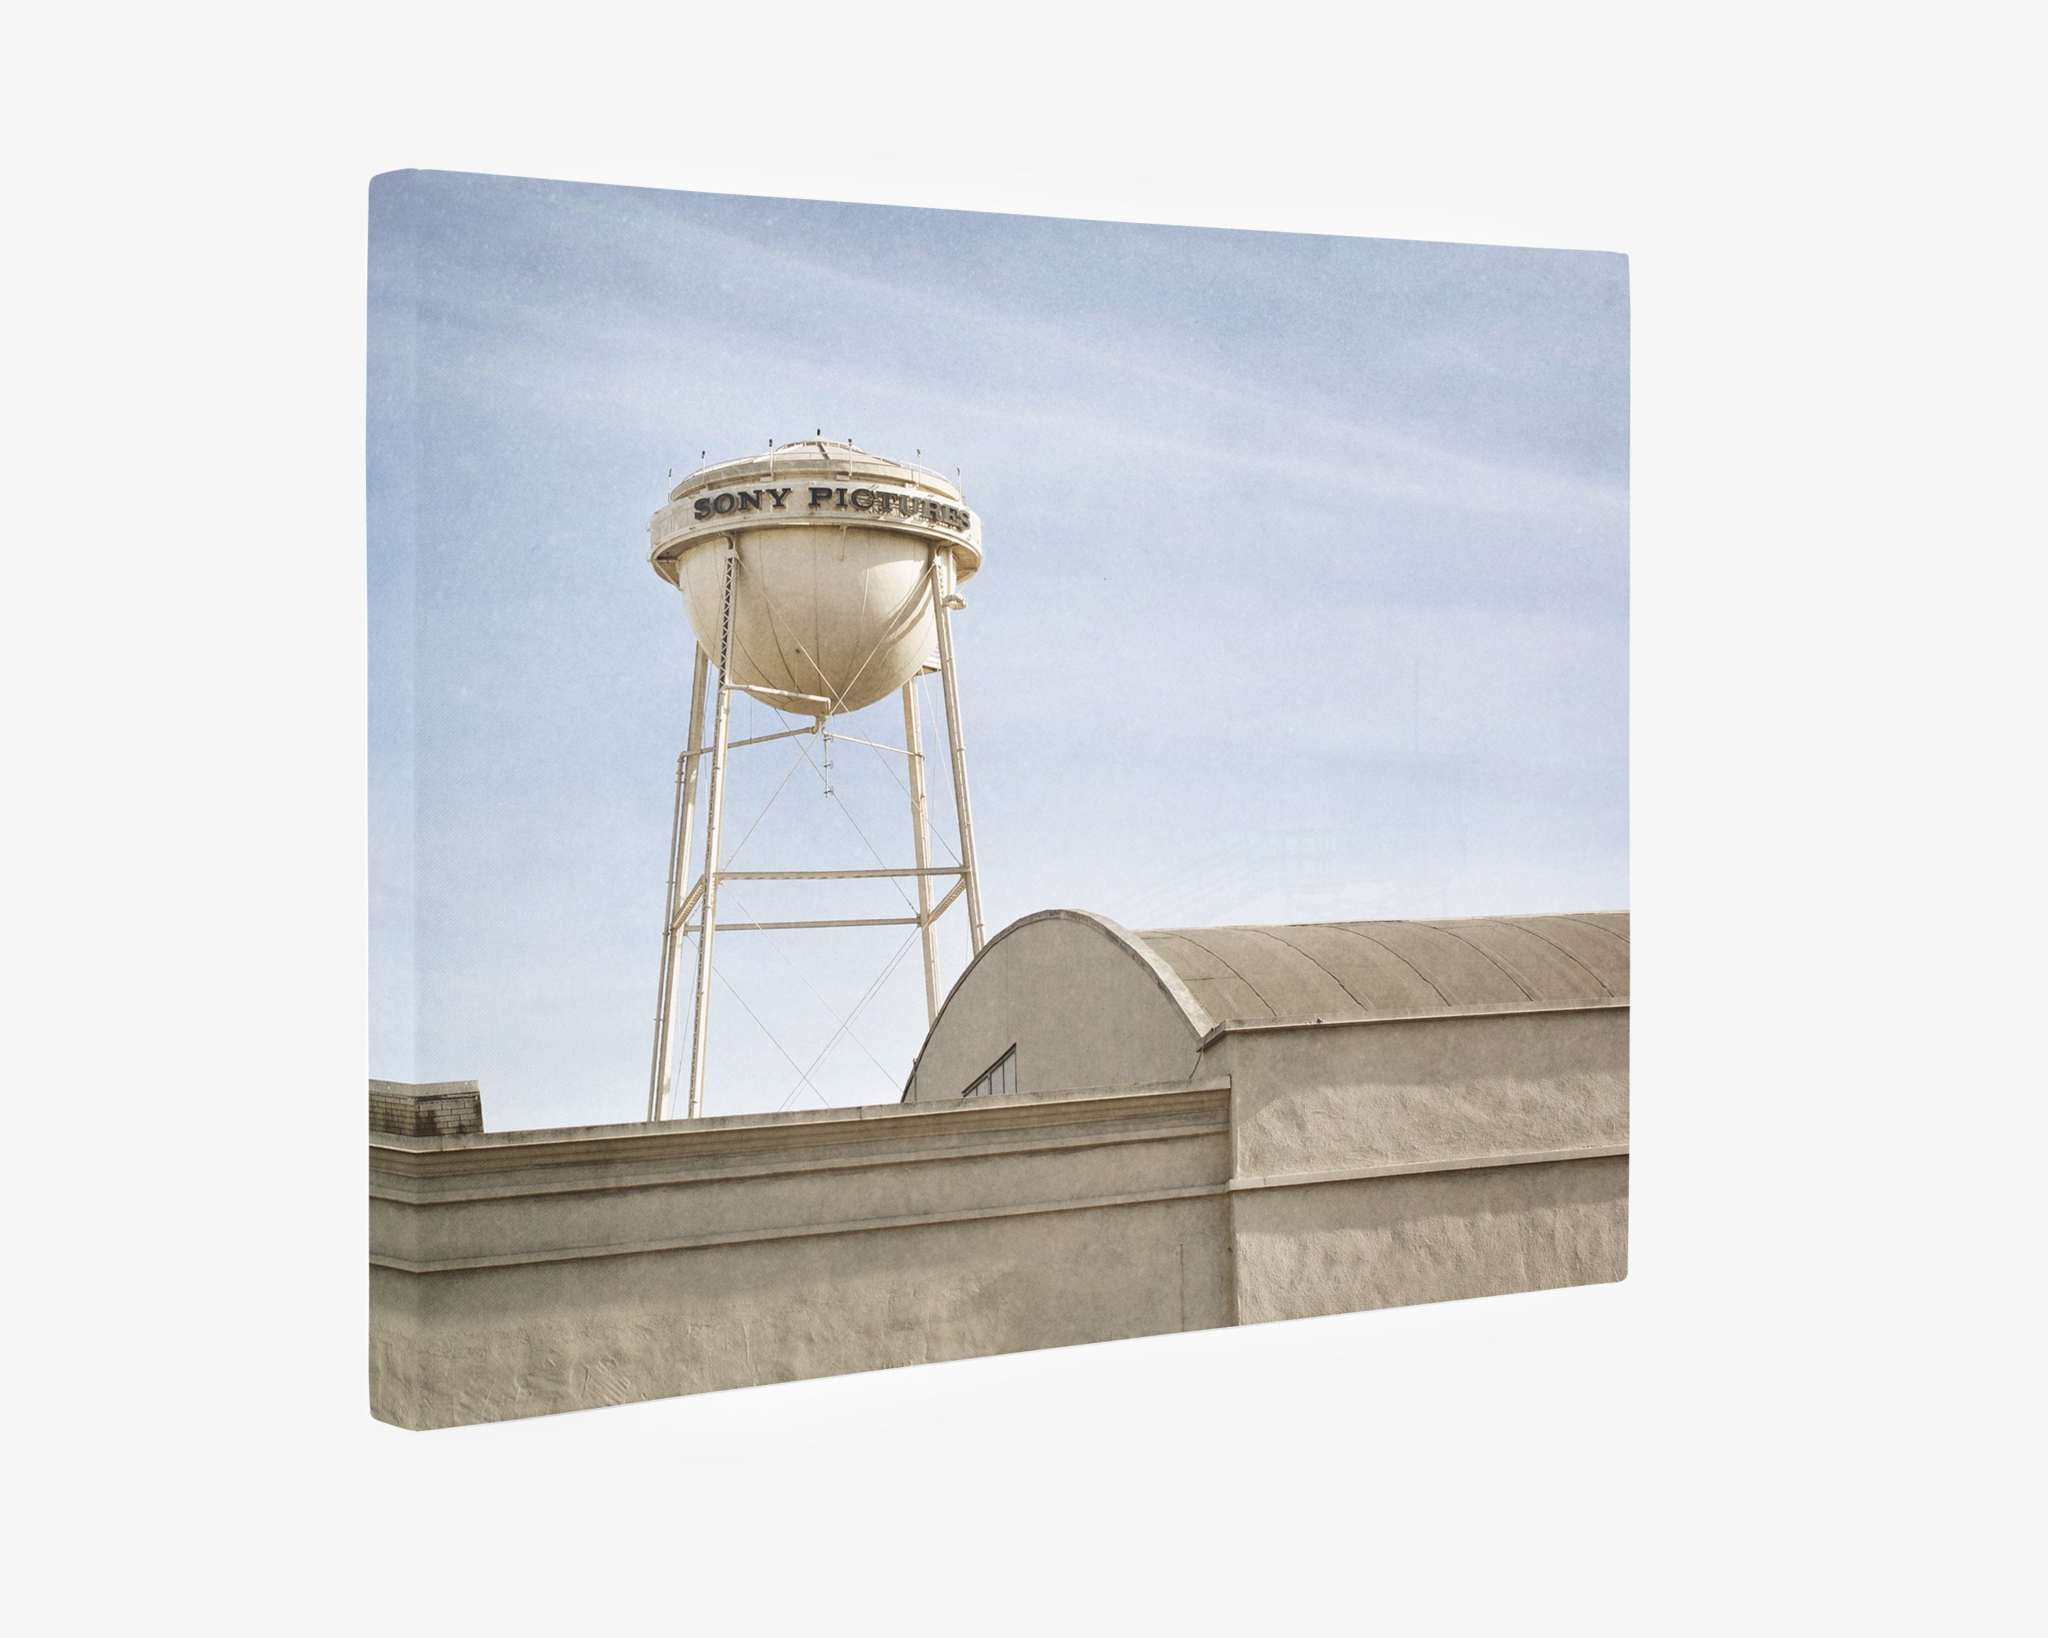 A rooftop view of a tall, white water tower with the words "Sony Pictures" written on it, situated against a clear blue sky. The tower stands behind a beige building with an arched roof, captured perfectly as if on an Offley Green Los Angeles Sony Pictures Studio Wall Art, 'Sony Lot'.